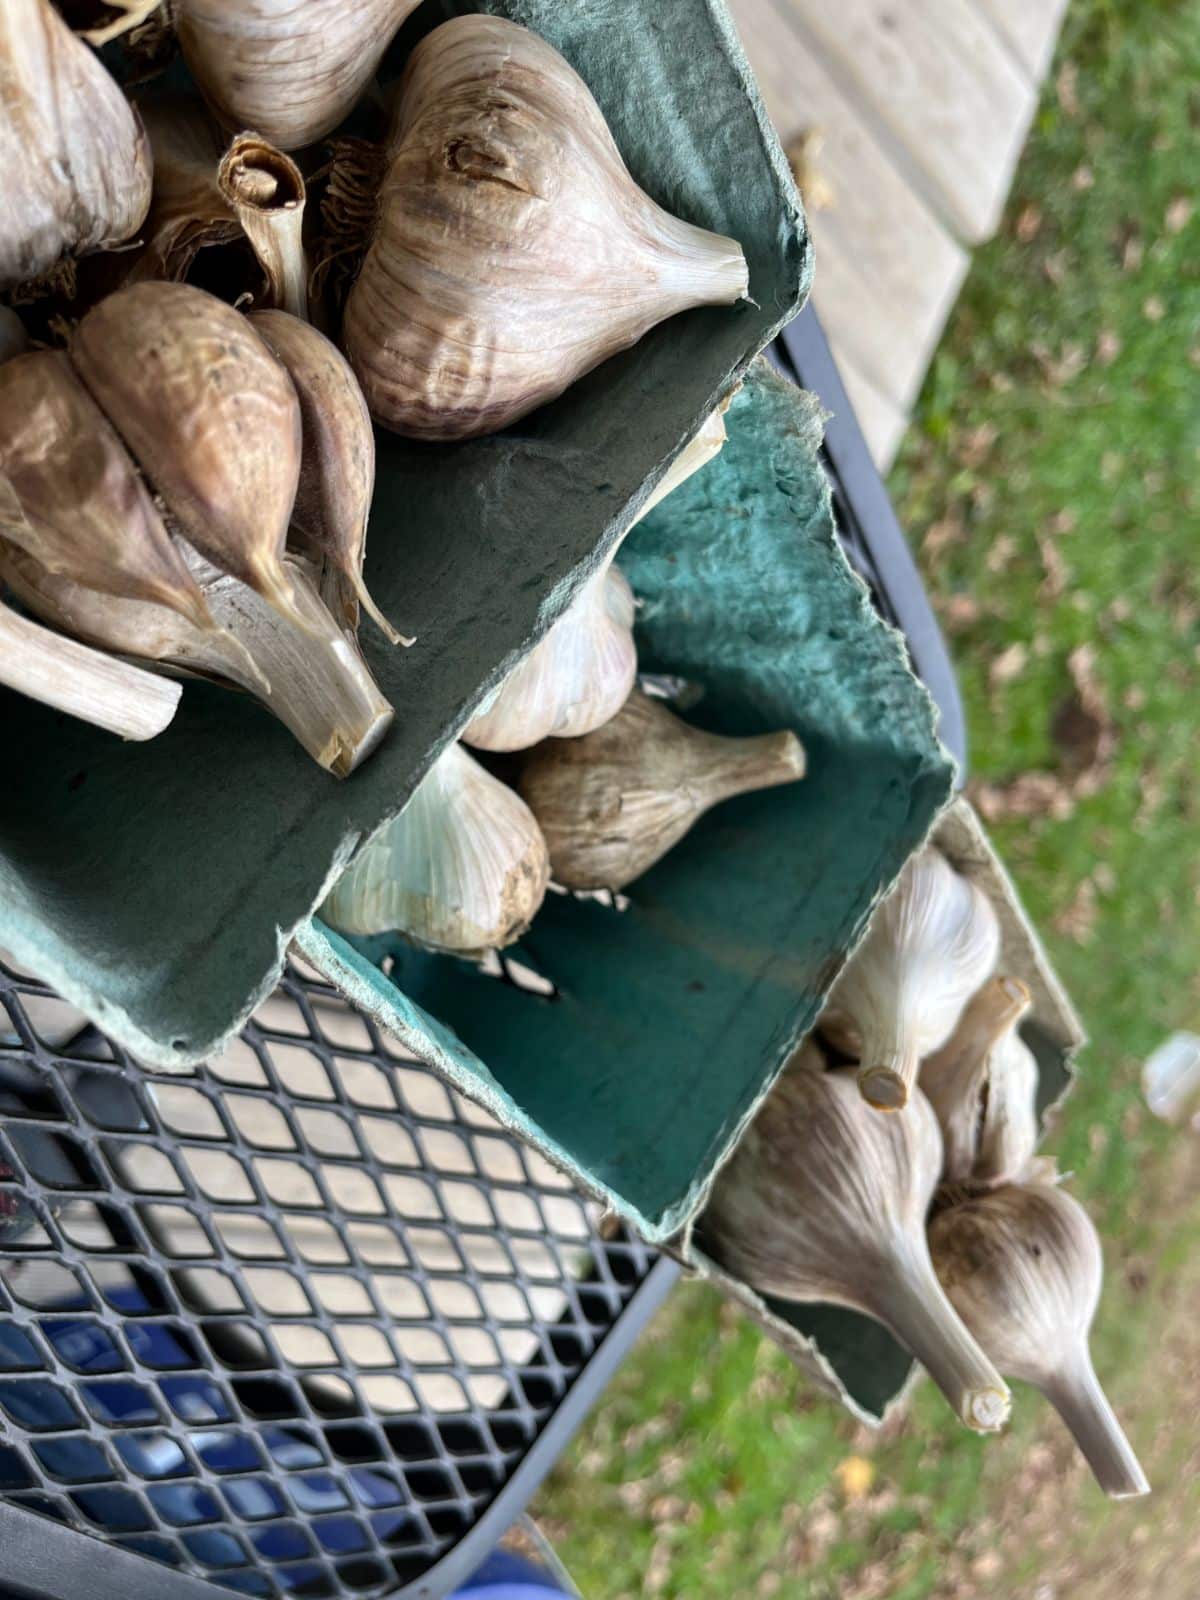 Sorted boxes of garlic for eating and planting